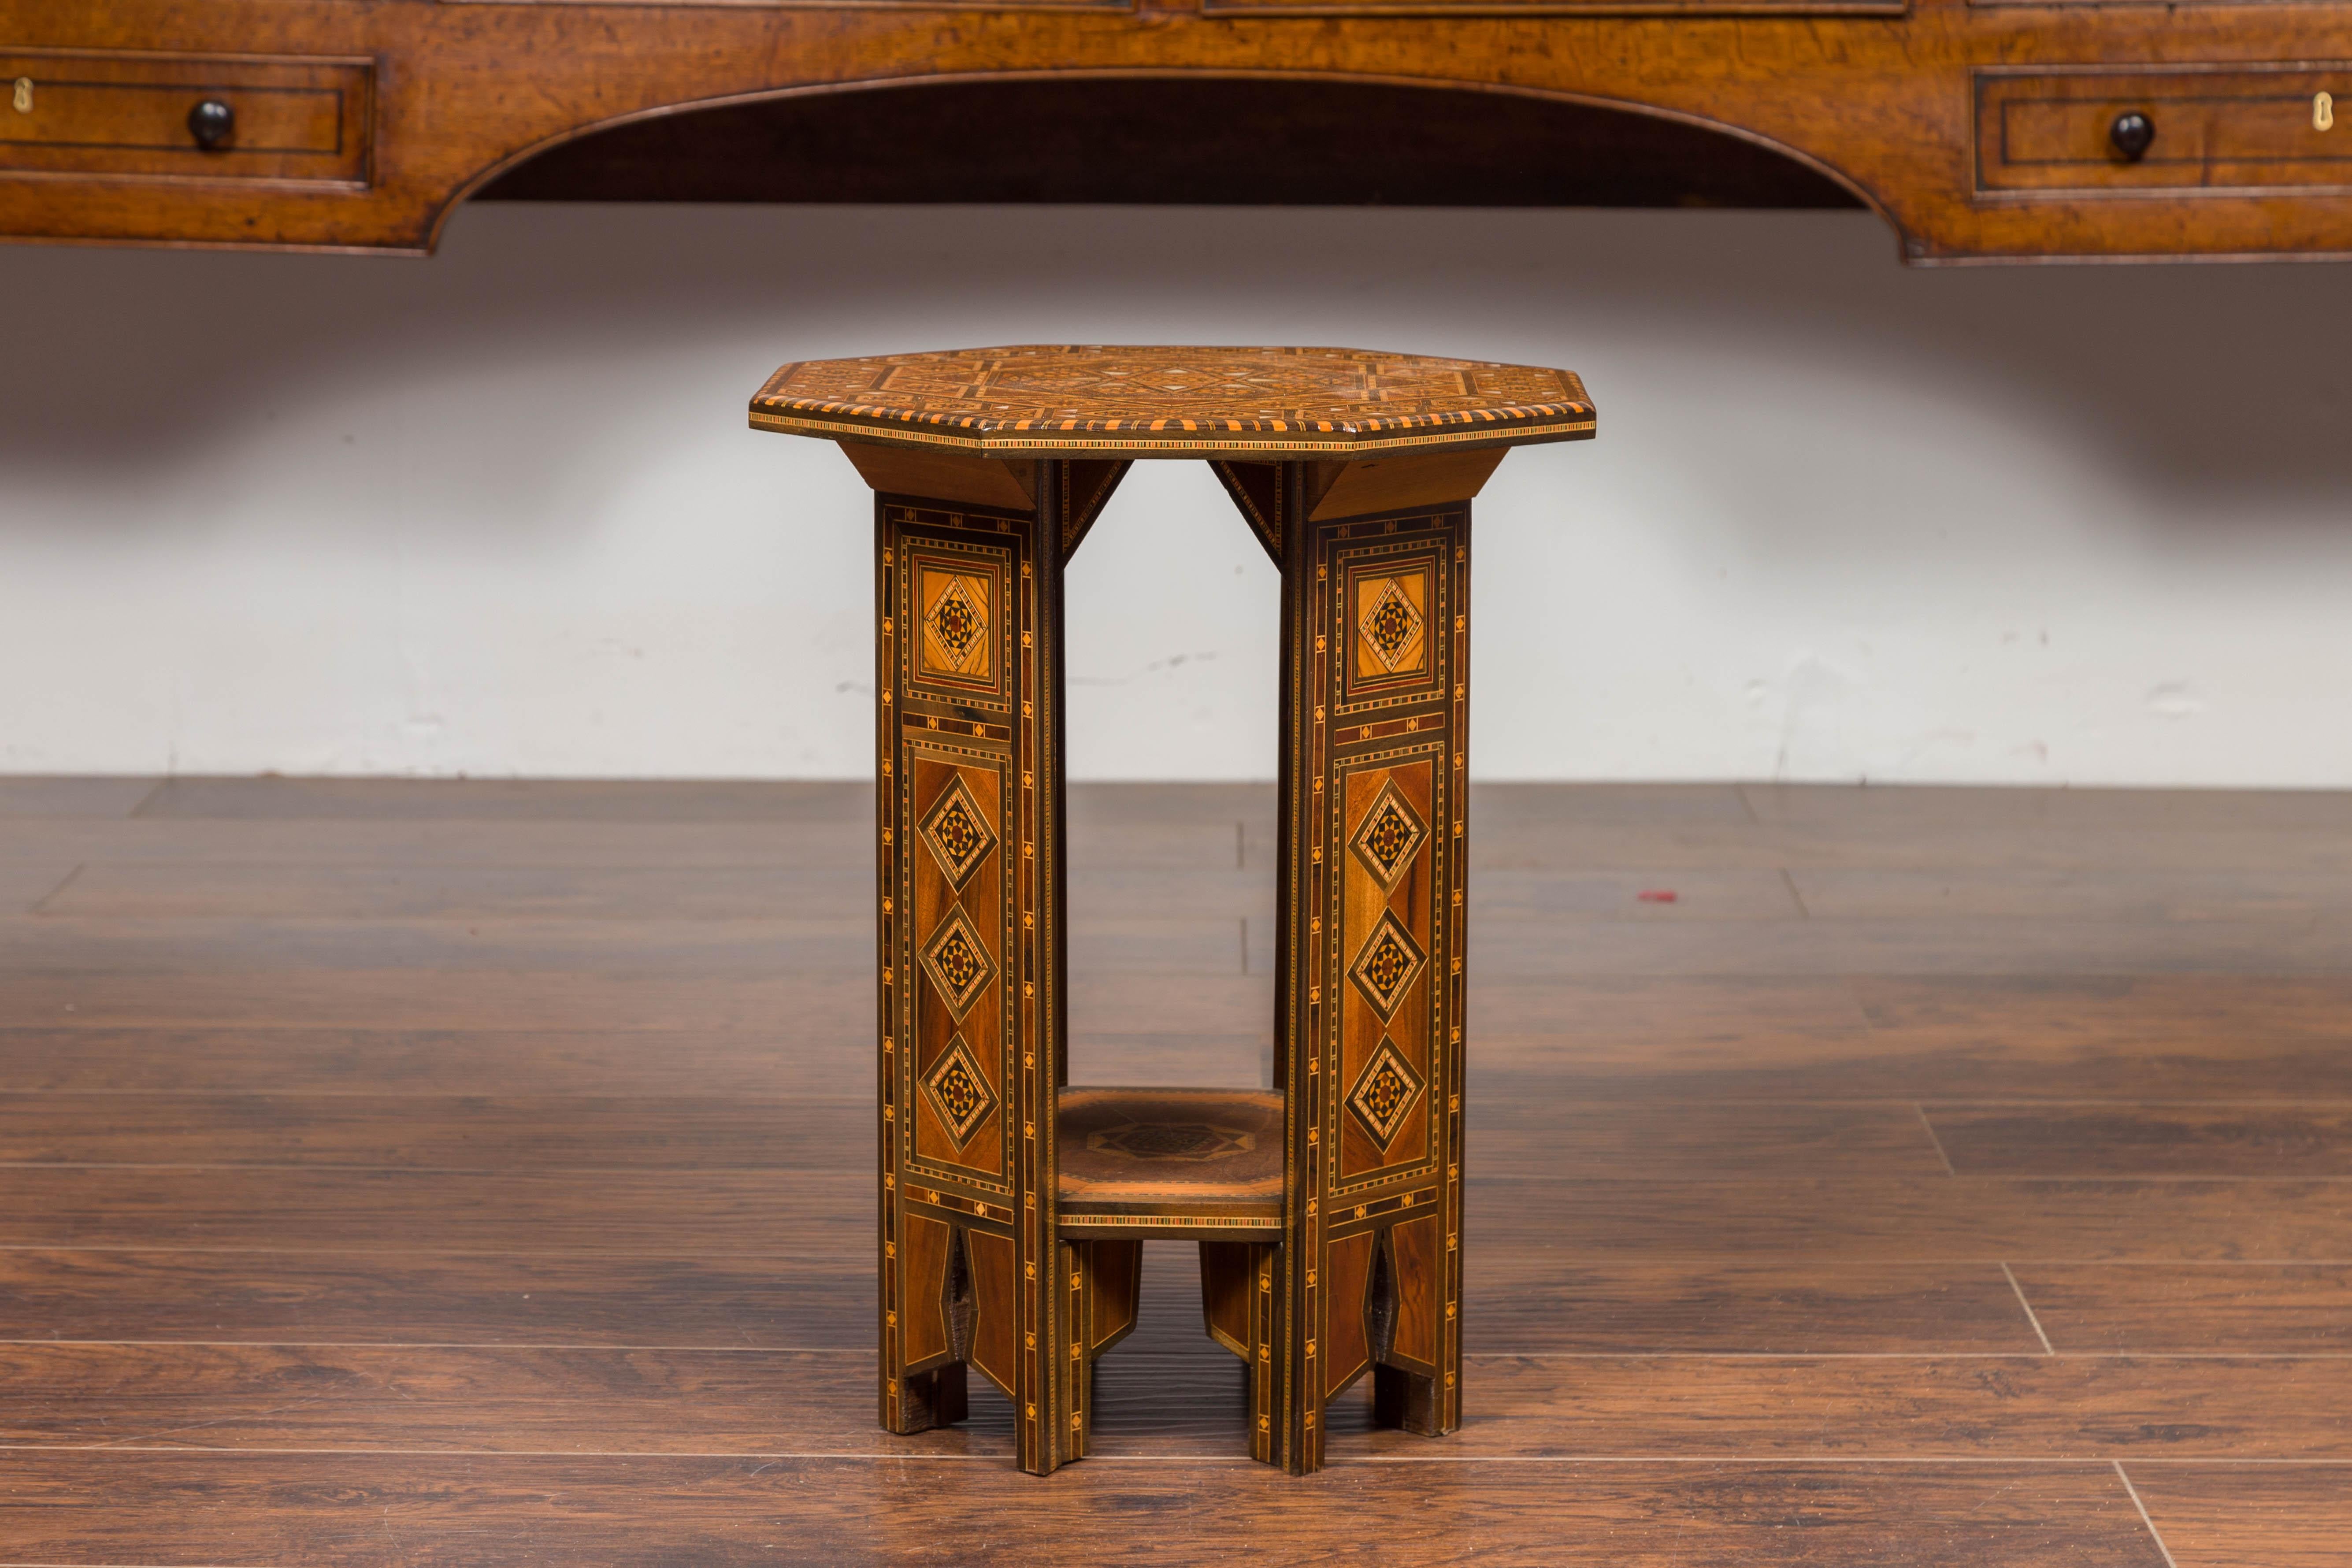 Polychromed Syrian Moorish Style 1920s Painted Octagonal Table with Pierced Sides and Shelf